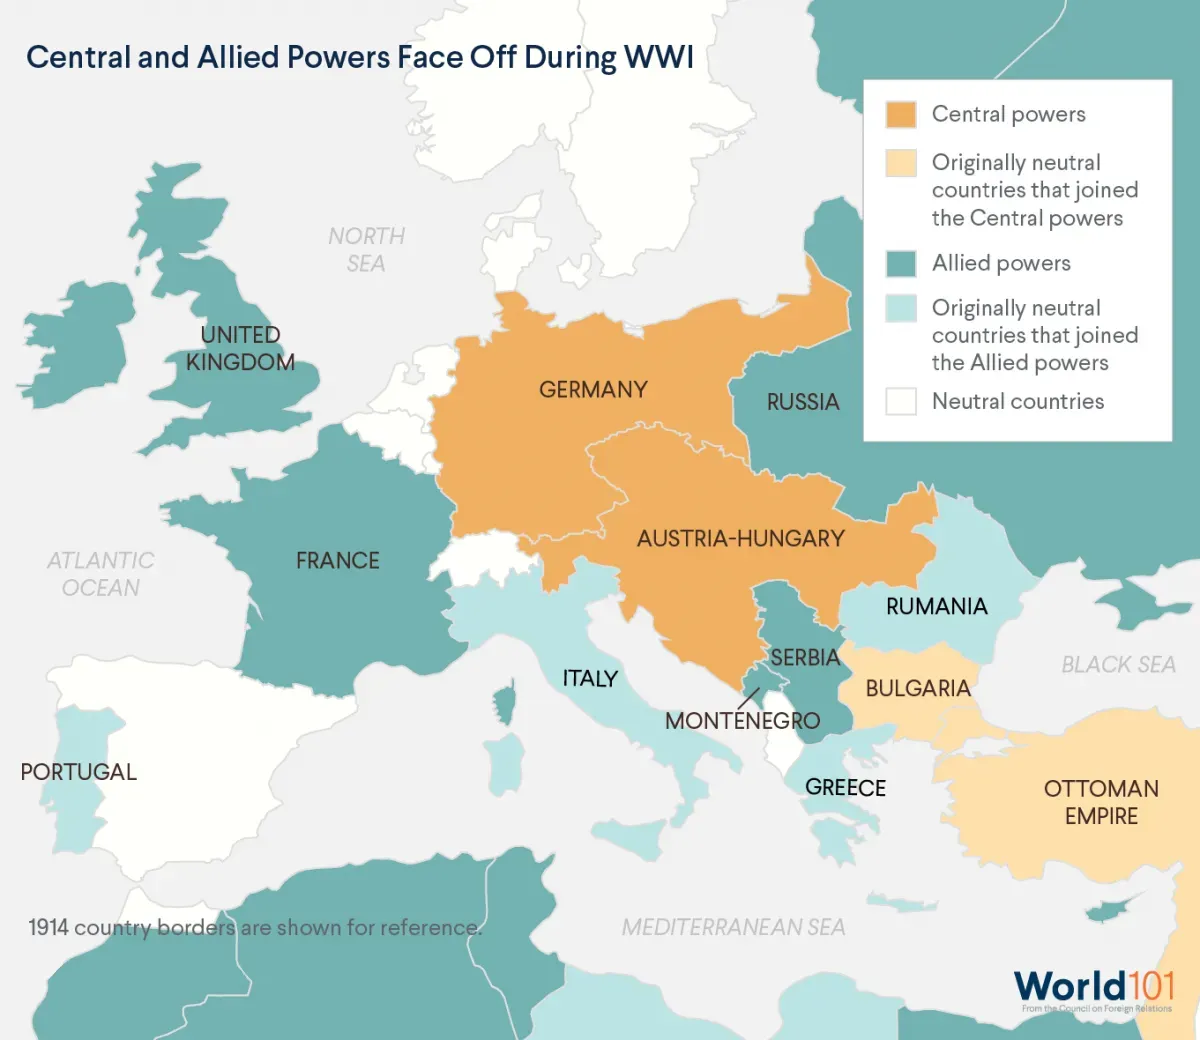 Map of the Allies and Central powers  in Europe that faced off during WWI. For more info contact us at world101@cfr.org.